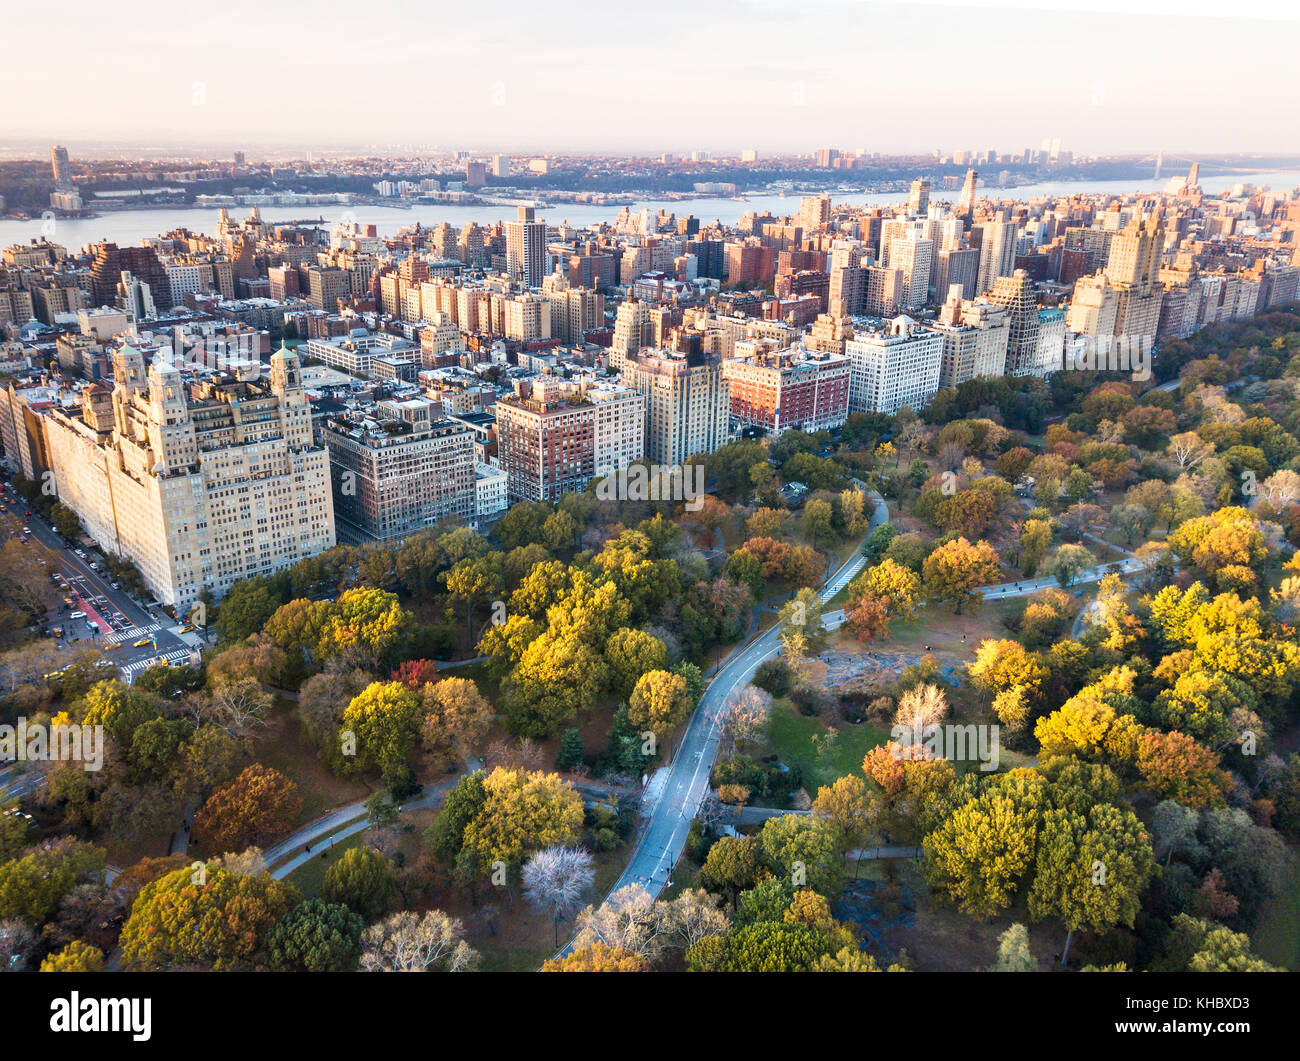 New York panorama shot from Central park, aerial view in autumn season Stock Photo